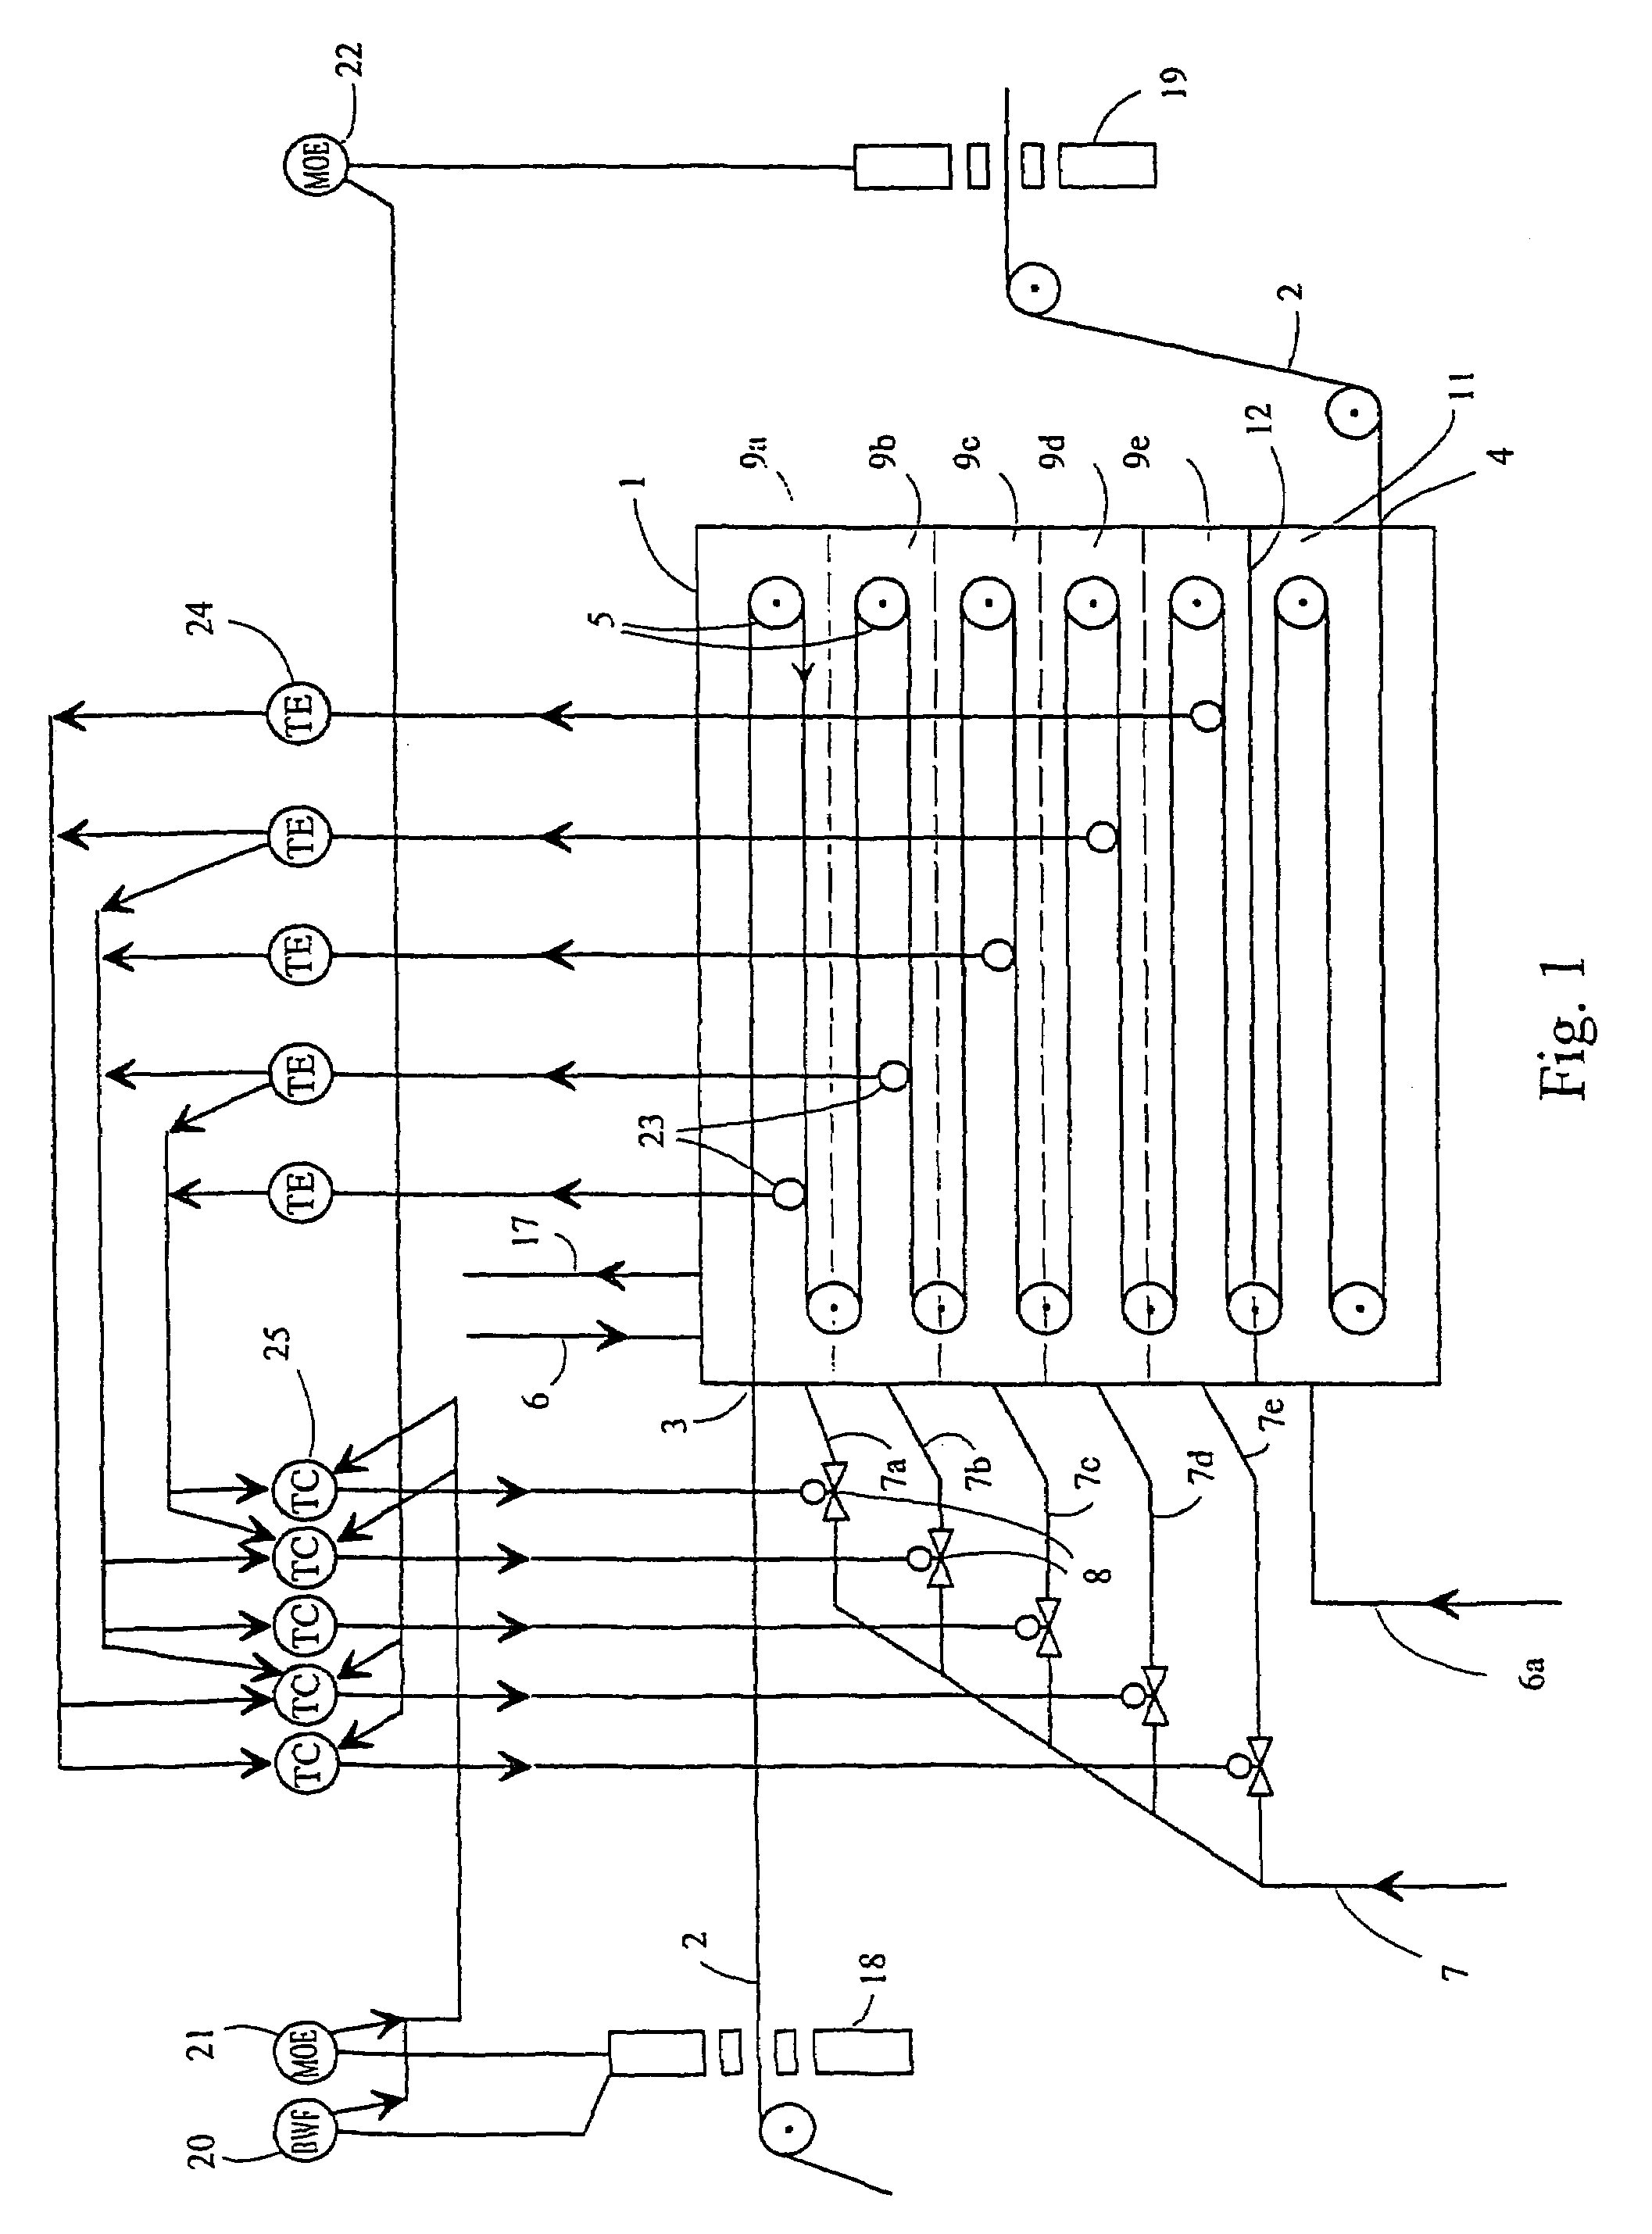 Method and equipment for drying a pulp web using hot air of different temperatures